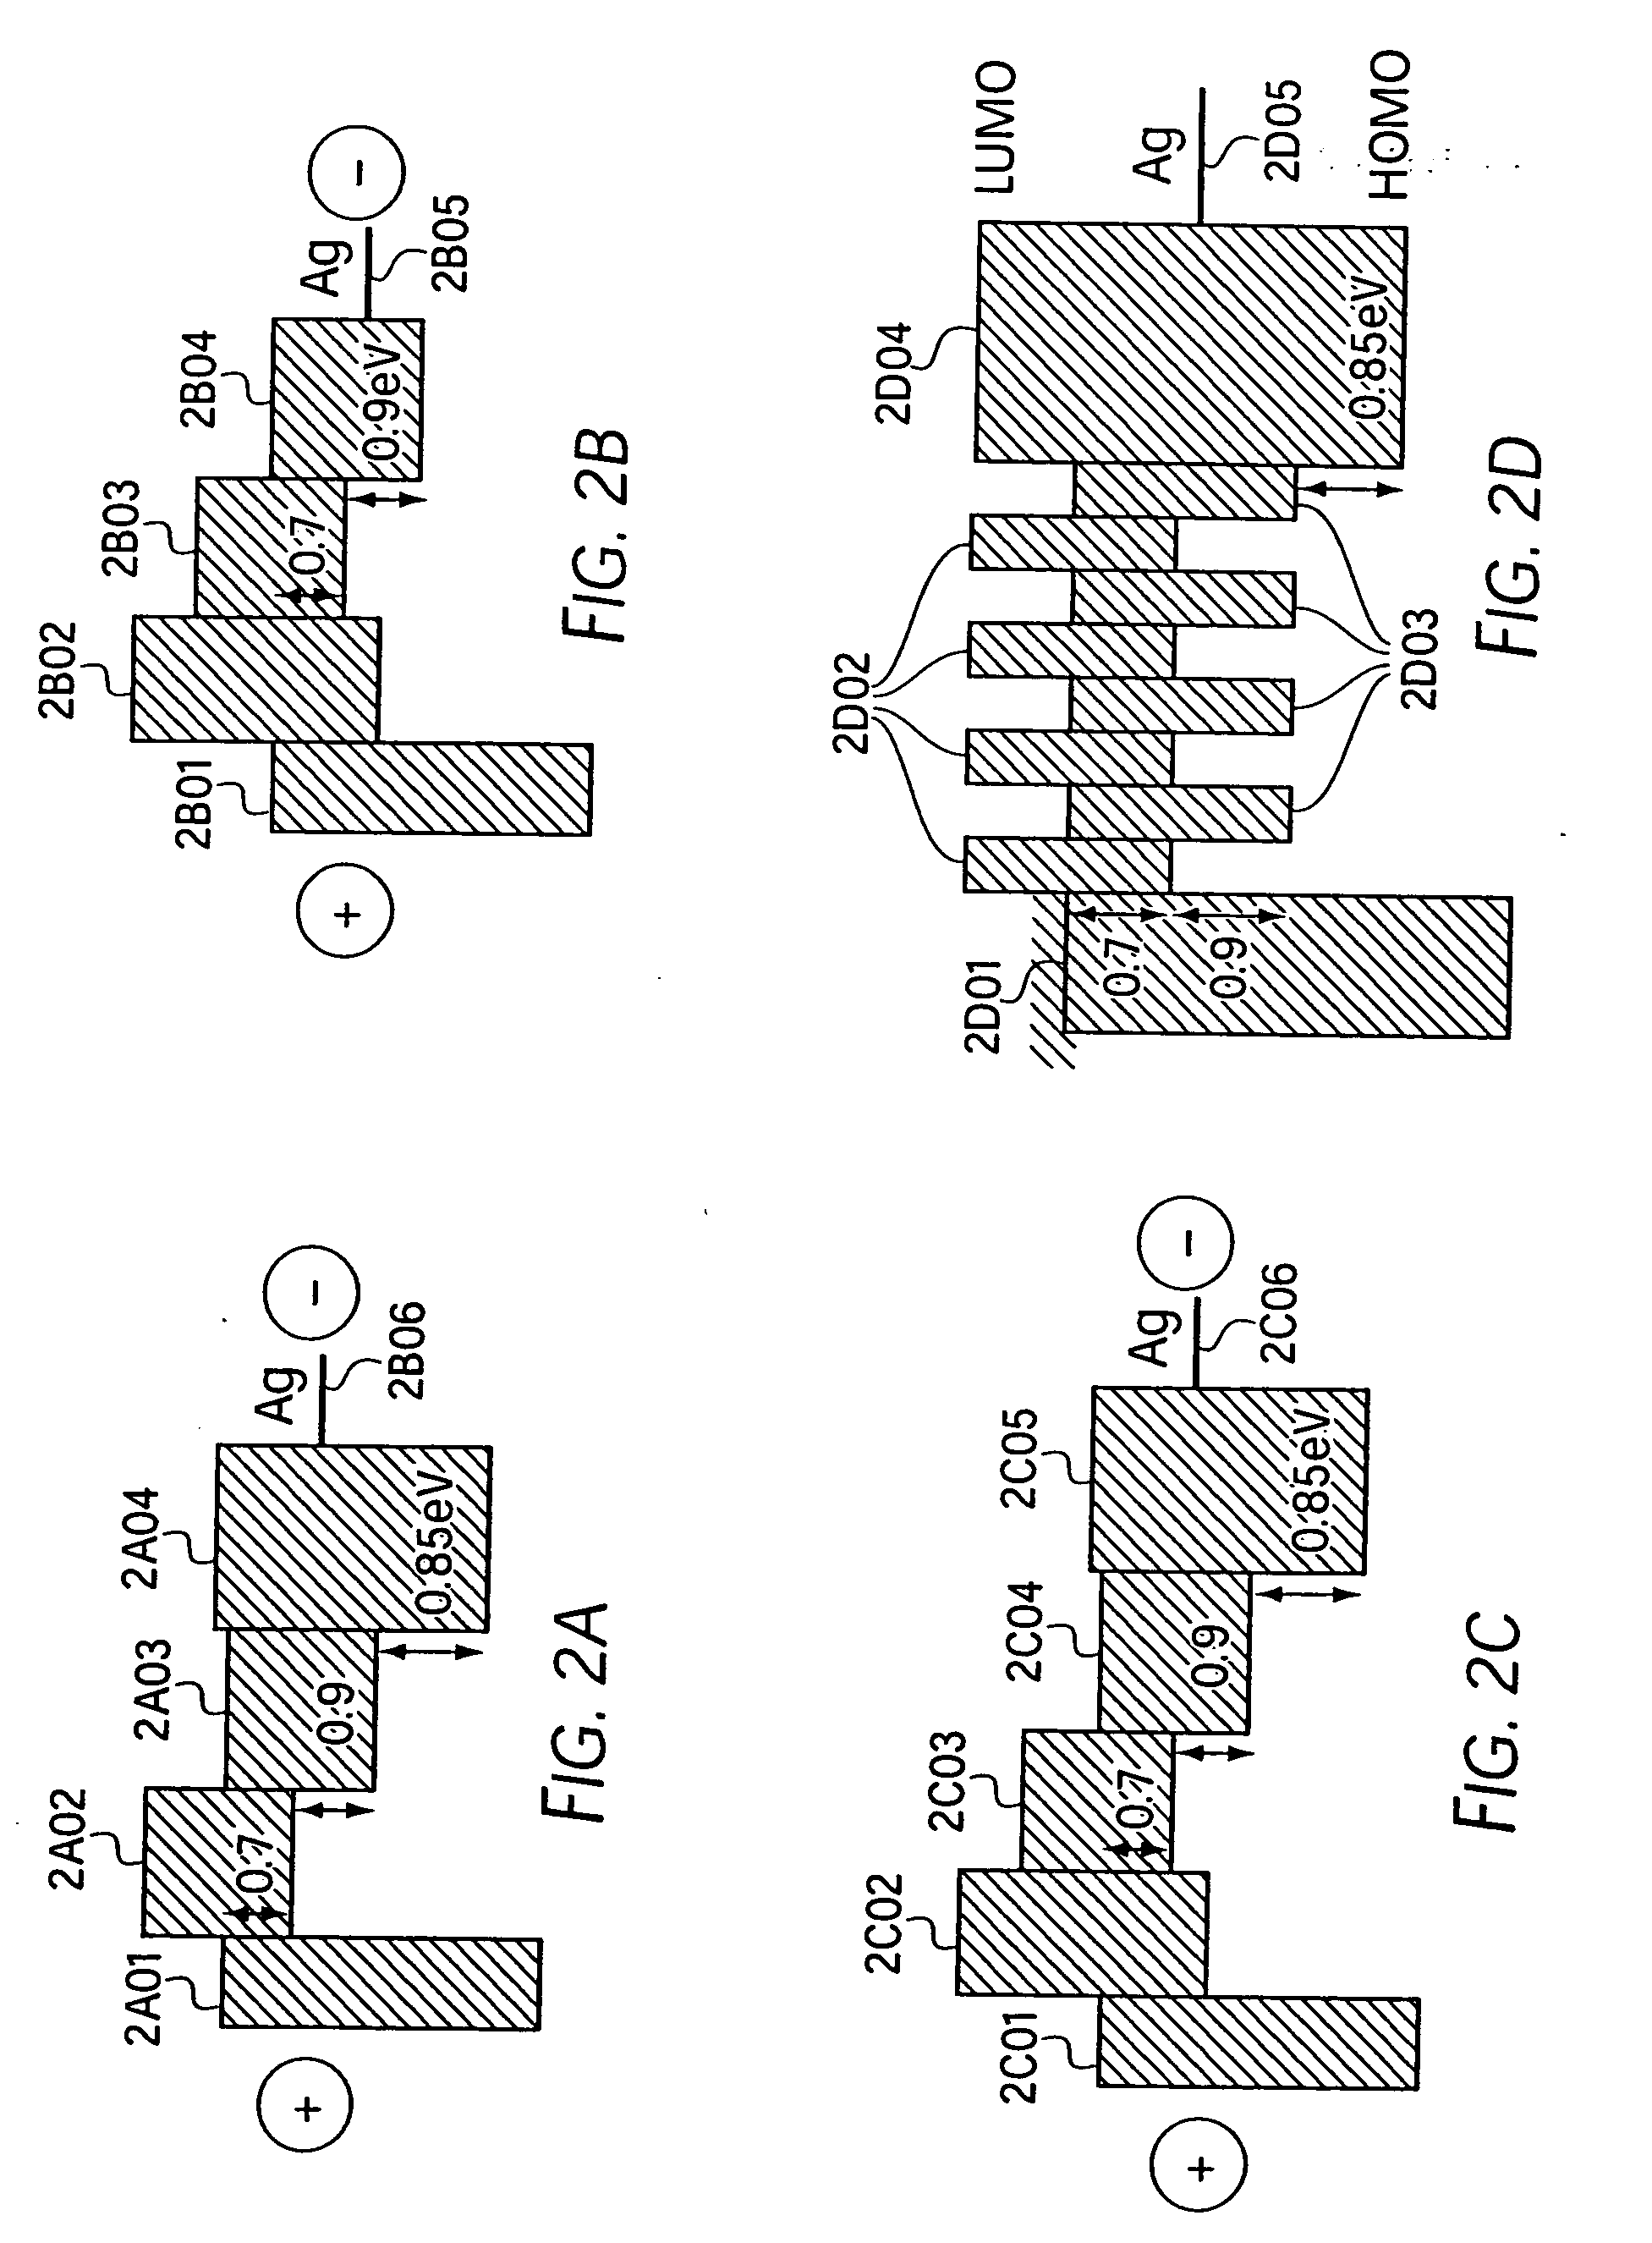 Organic photosensitive optoelectronic device with an exciton blocking layer